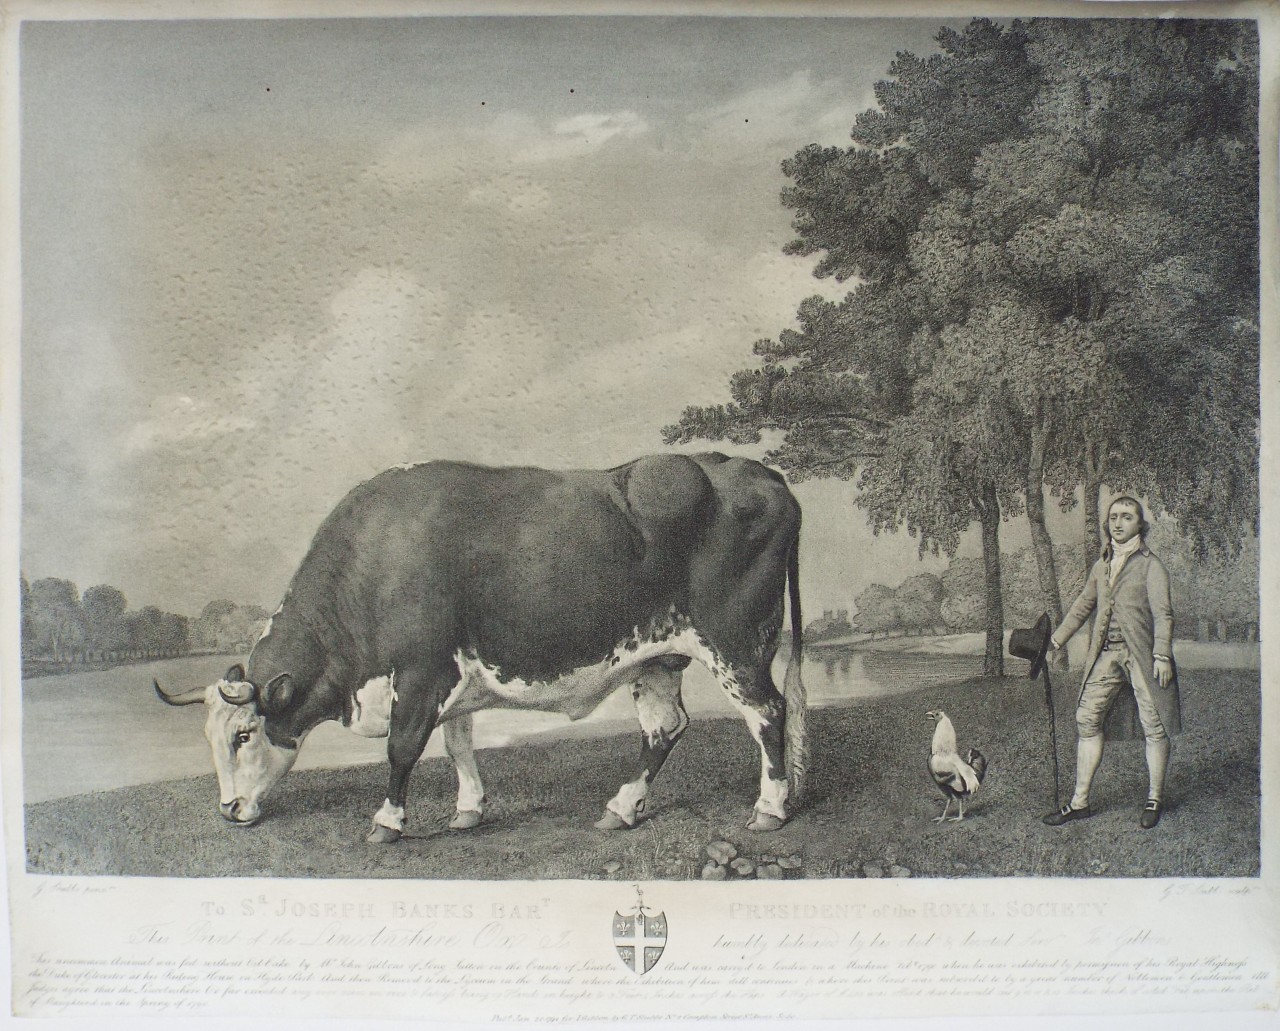 Etching with stipple and mezzotint - To Sr. Joseph Banks Bart President of the Royal Society This Print of the Lincolnshire Ox is humbly dedicated by his obedt & devoted Servt Jno Gibbons - Stubbs